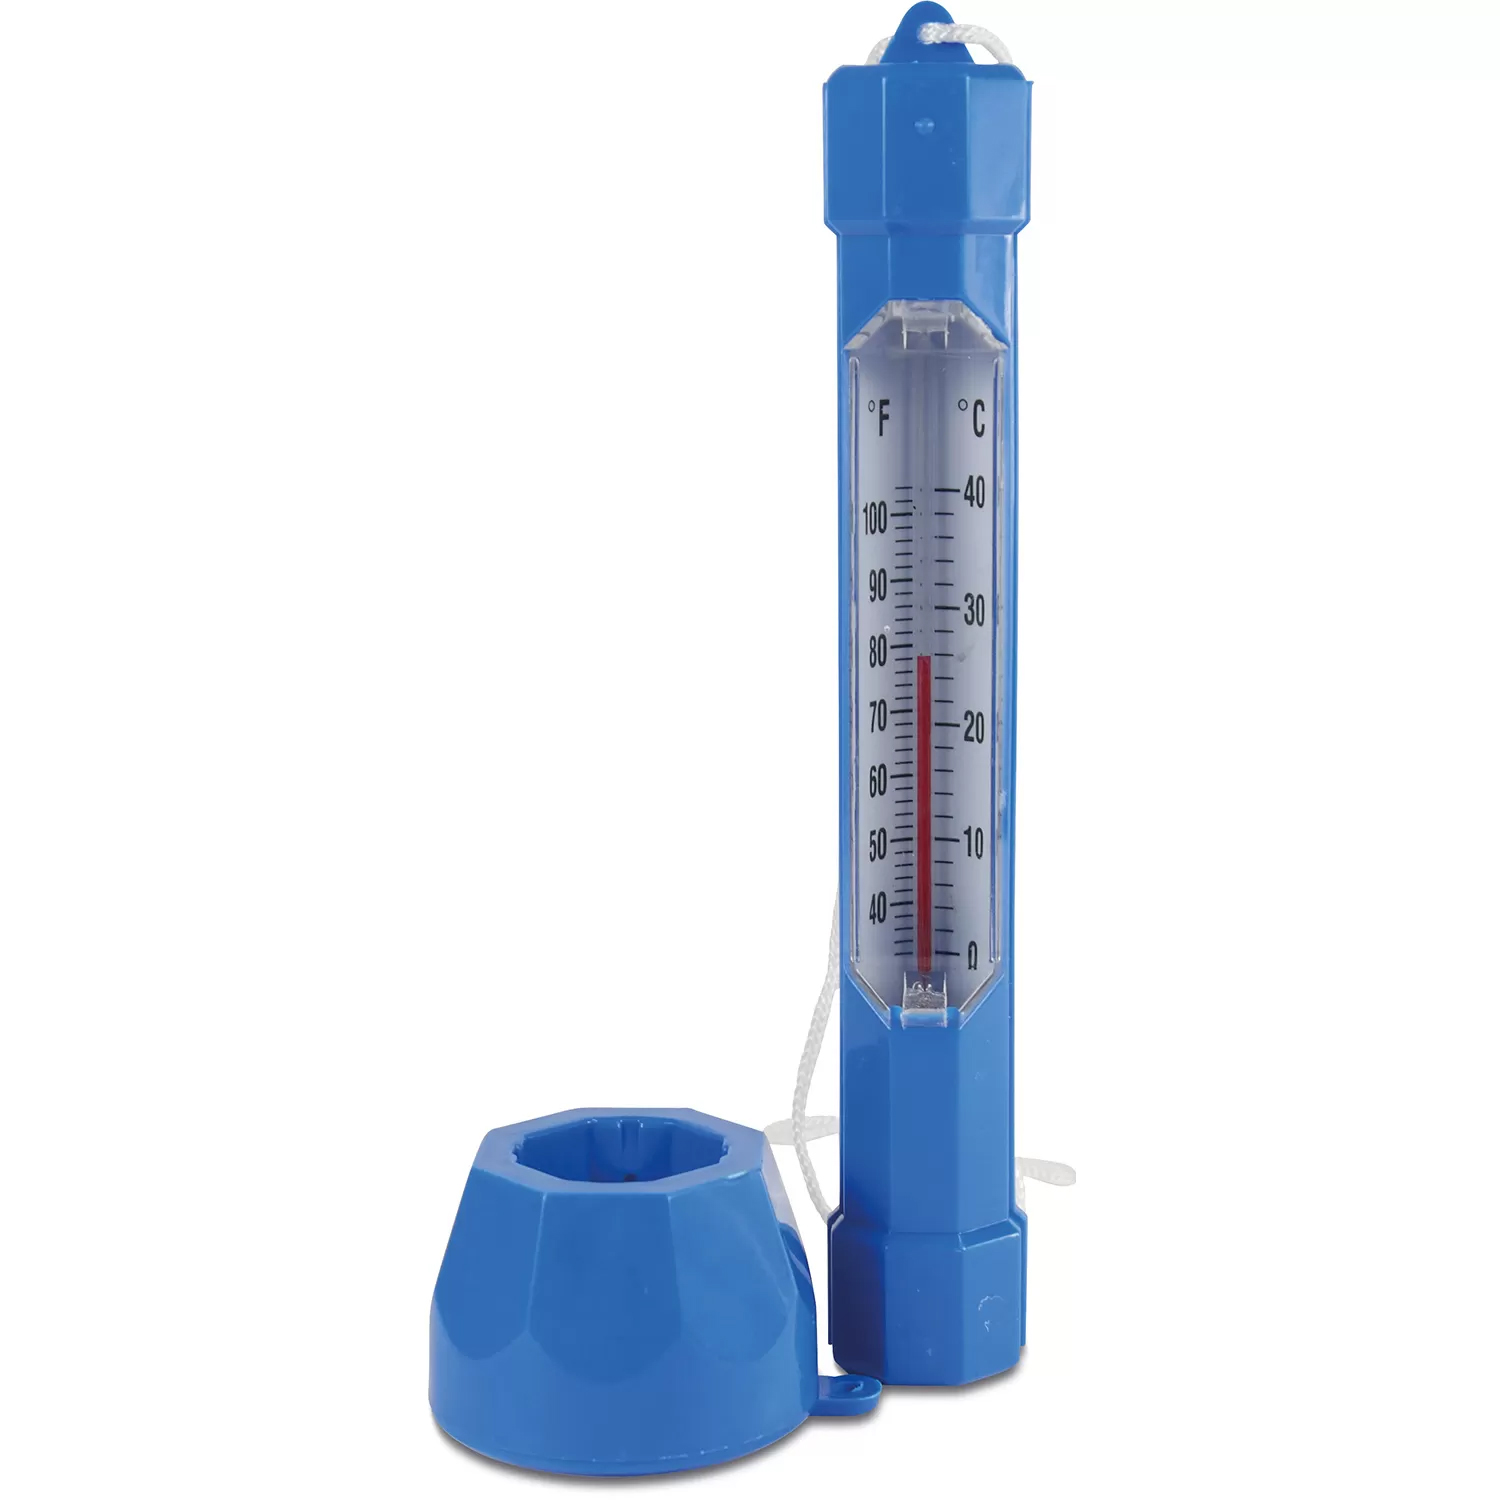 ABMT 00143001 Floating thermometer